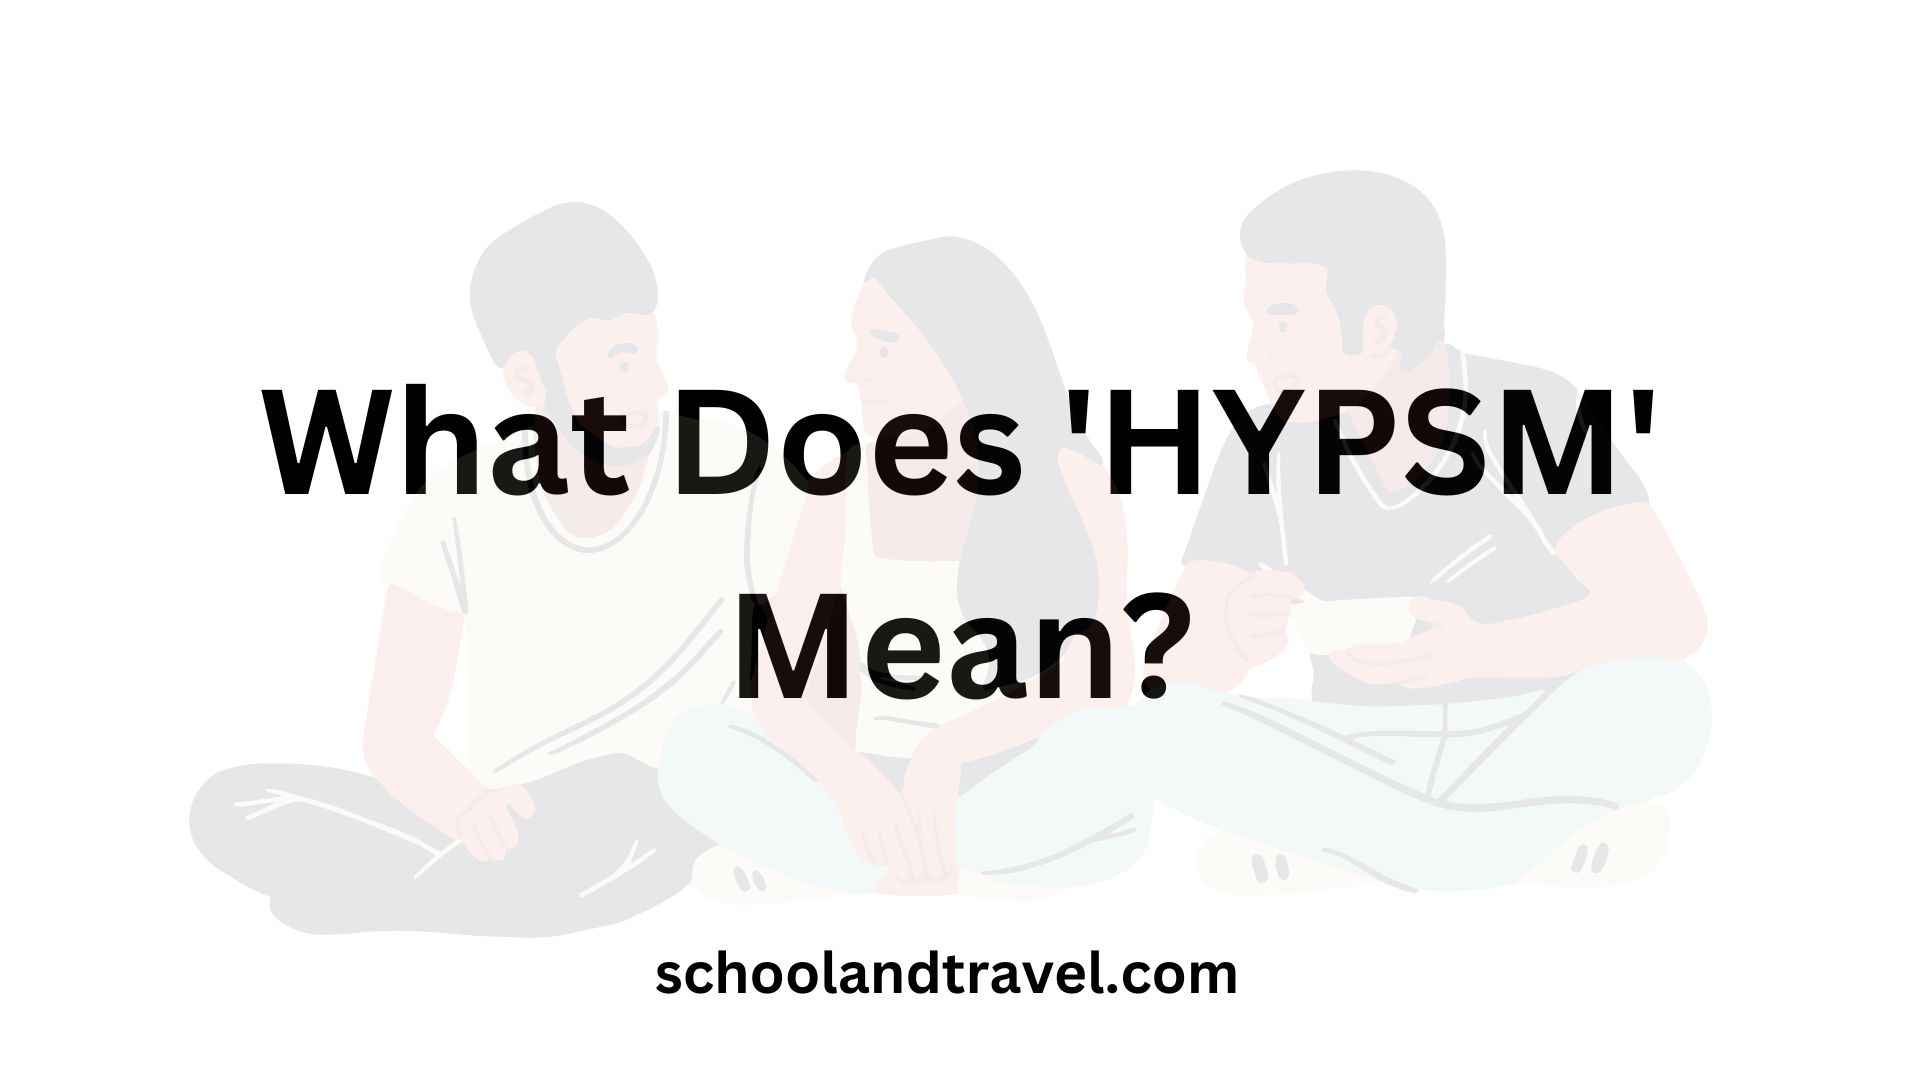 What Does 'HYPSM' Mean?